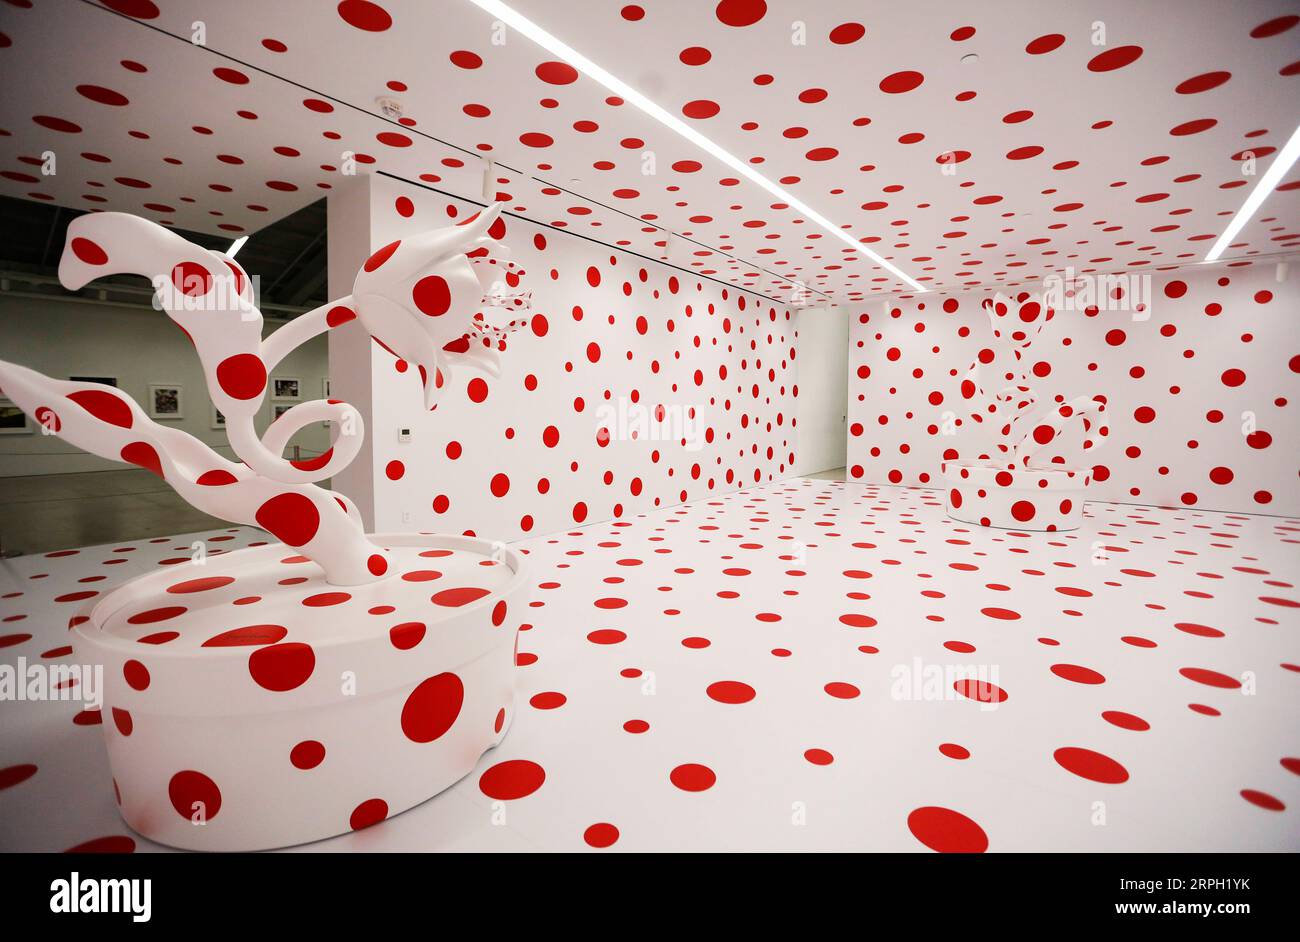 In Pictures: Louis Vuitton X Yayoi Kusama descends upon Harrods